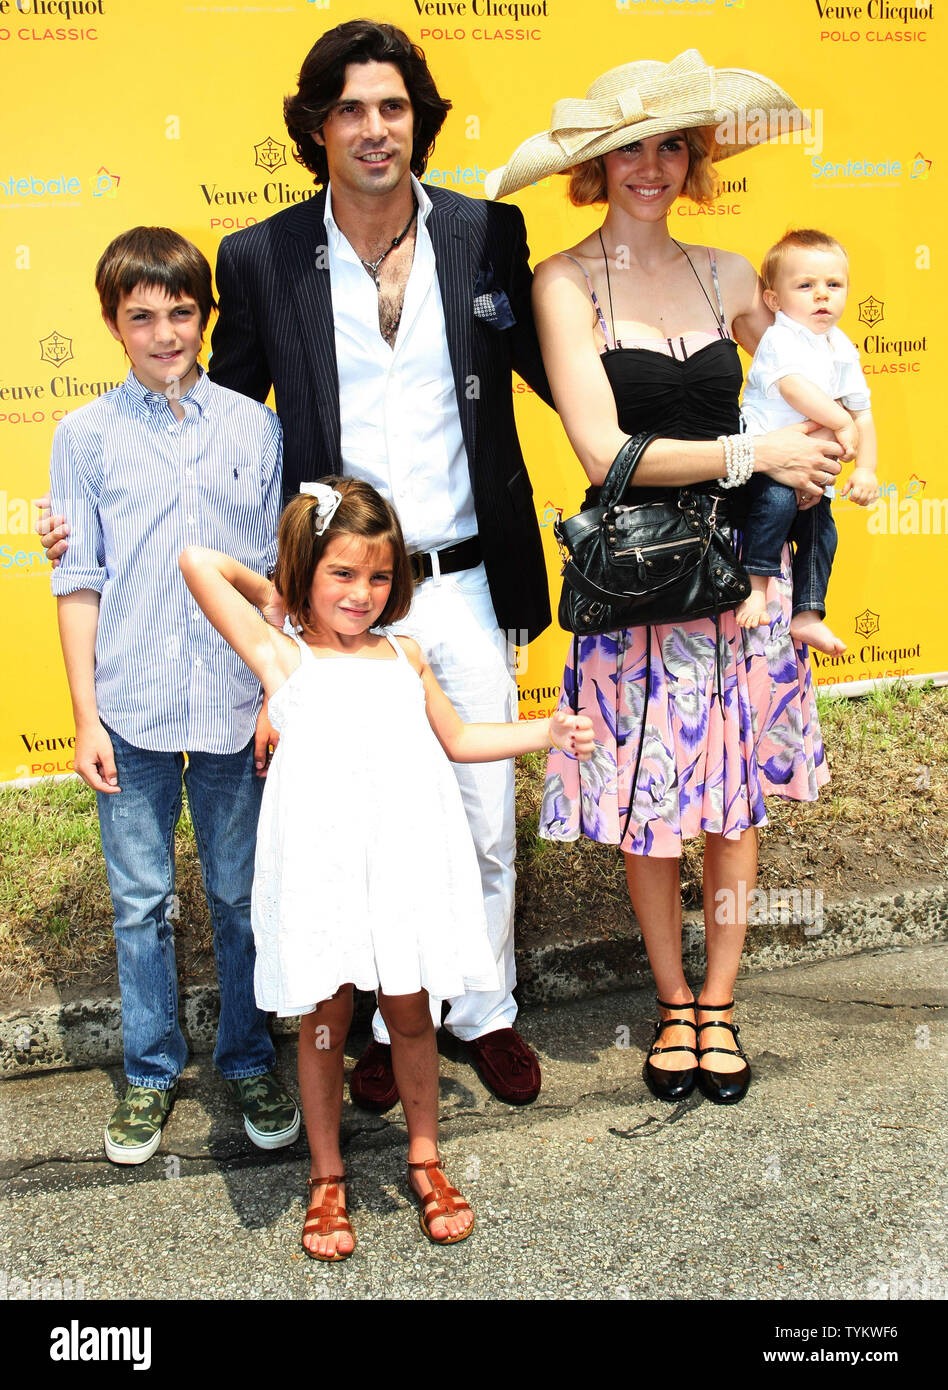 Argentina polo star Nacho Figueras and his wife Delfina and children attends the third annual Veuve Clicquot Polo Classic match which Prince Harry of Wales will be participating in on Governors Island on June 27, 2010 in New York.     UPI/Monika Graff Stock Photo